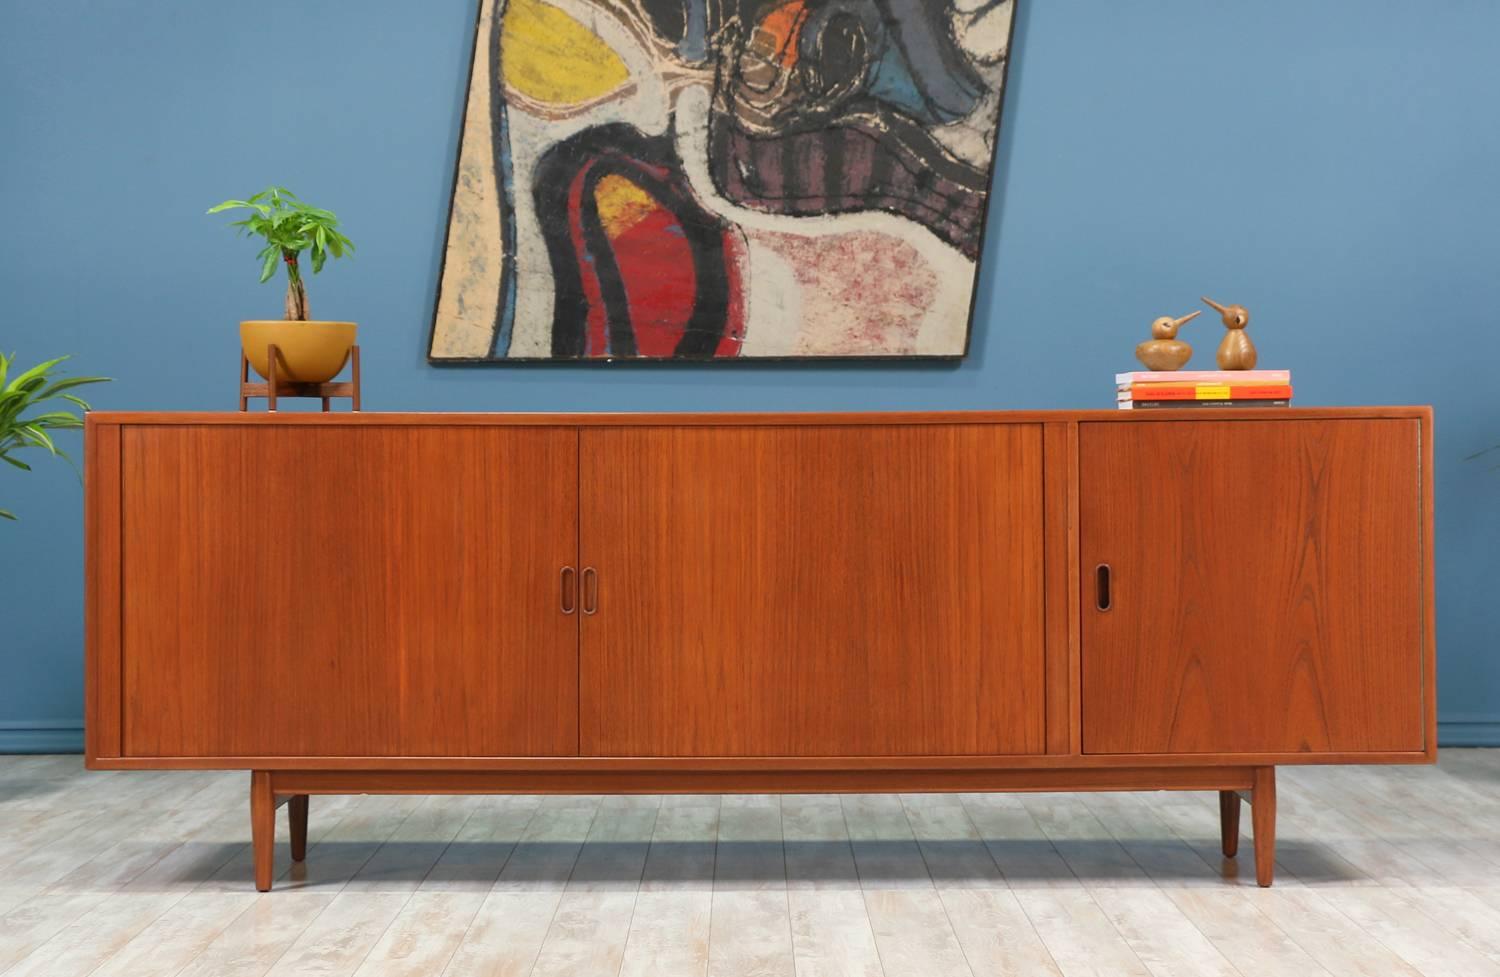 Danish Modern teak credenza designed by Arne Vodder for Sibast Møbler in Denmark circa 1950’s. This impressive credenza features a teak wood frame with two tambour doors that slide open smoothly to reveal six dovetailed trays positioned in the